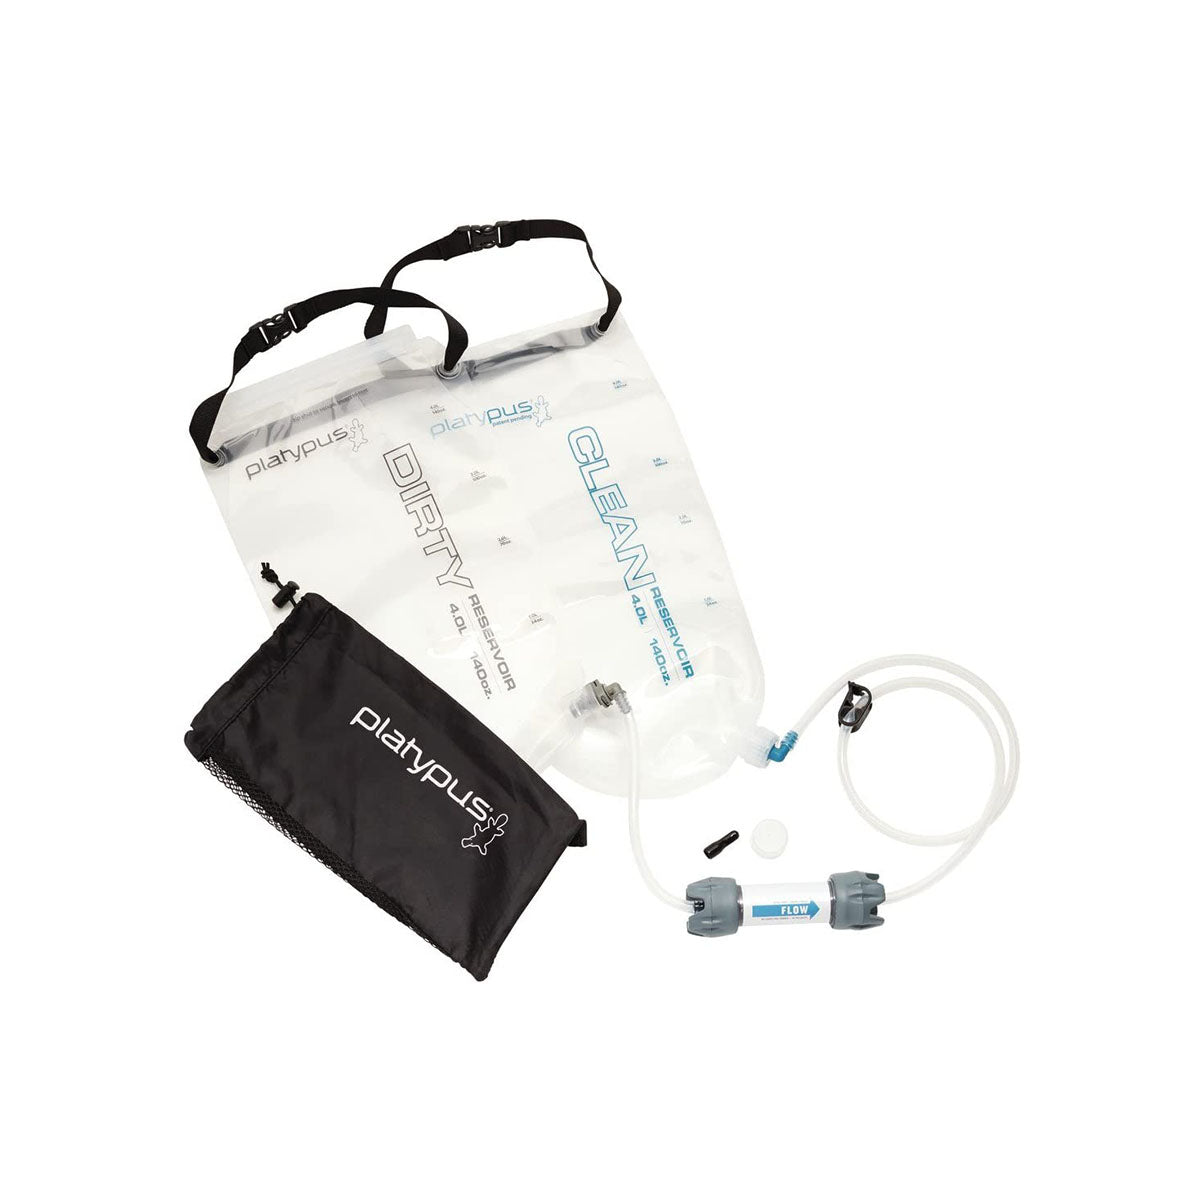 Water Filters &amp; Purifiers: Platypus GravityWorks 4L Complete Water Filter Kit